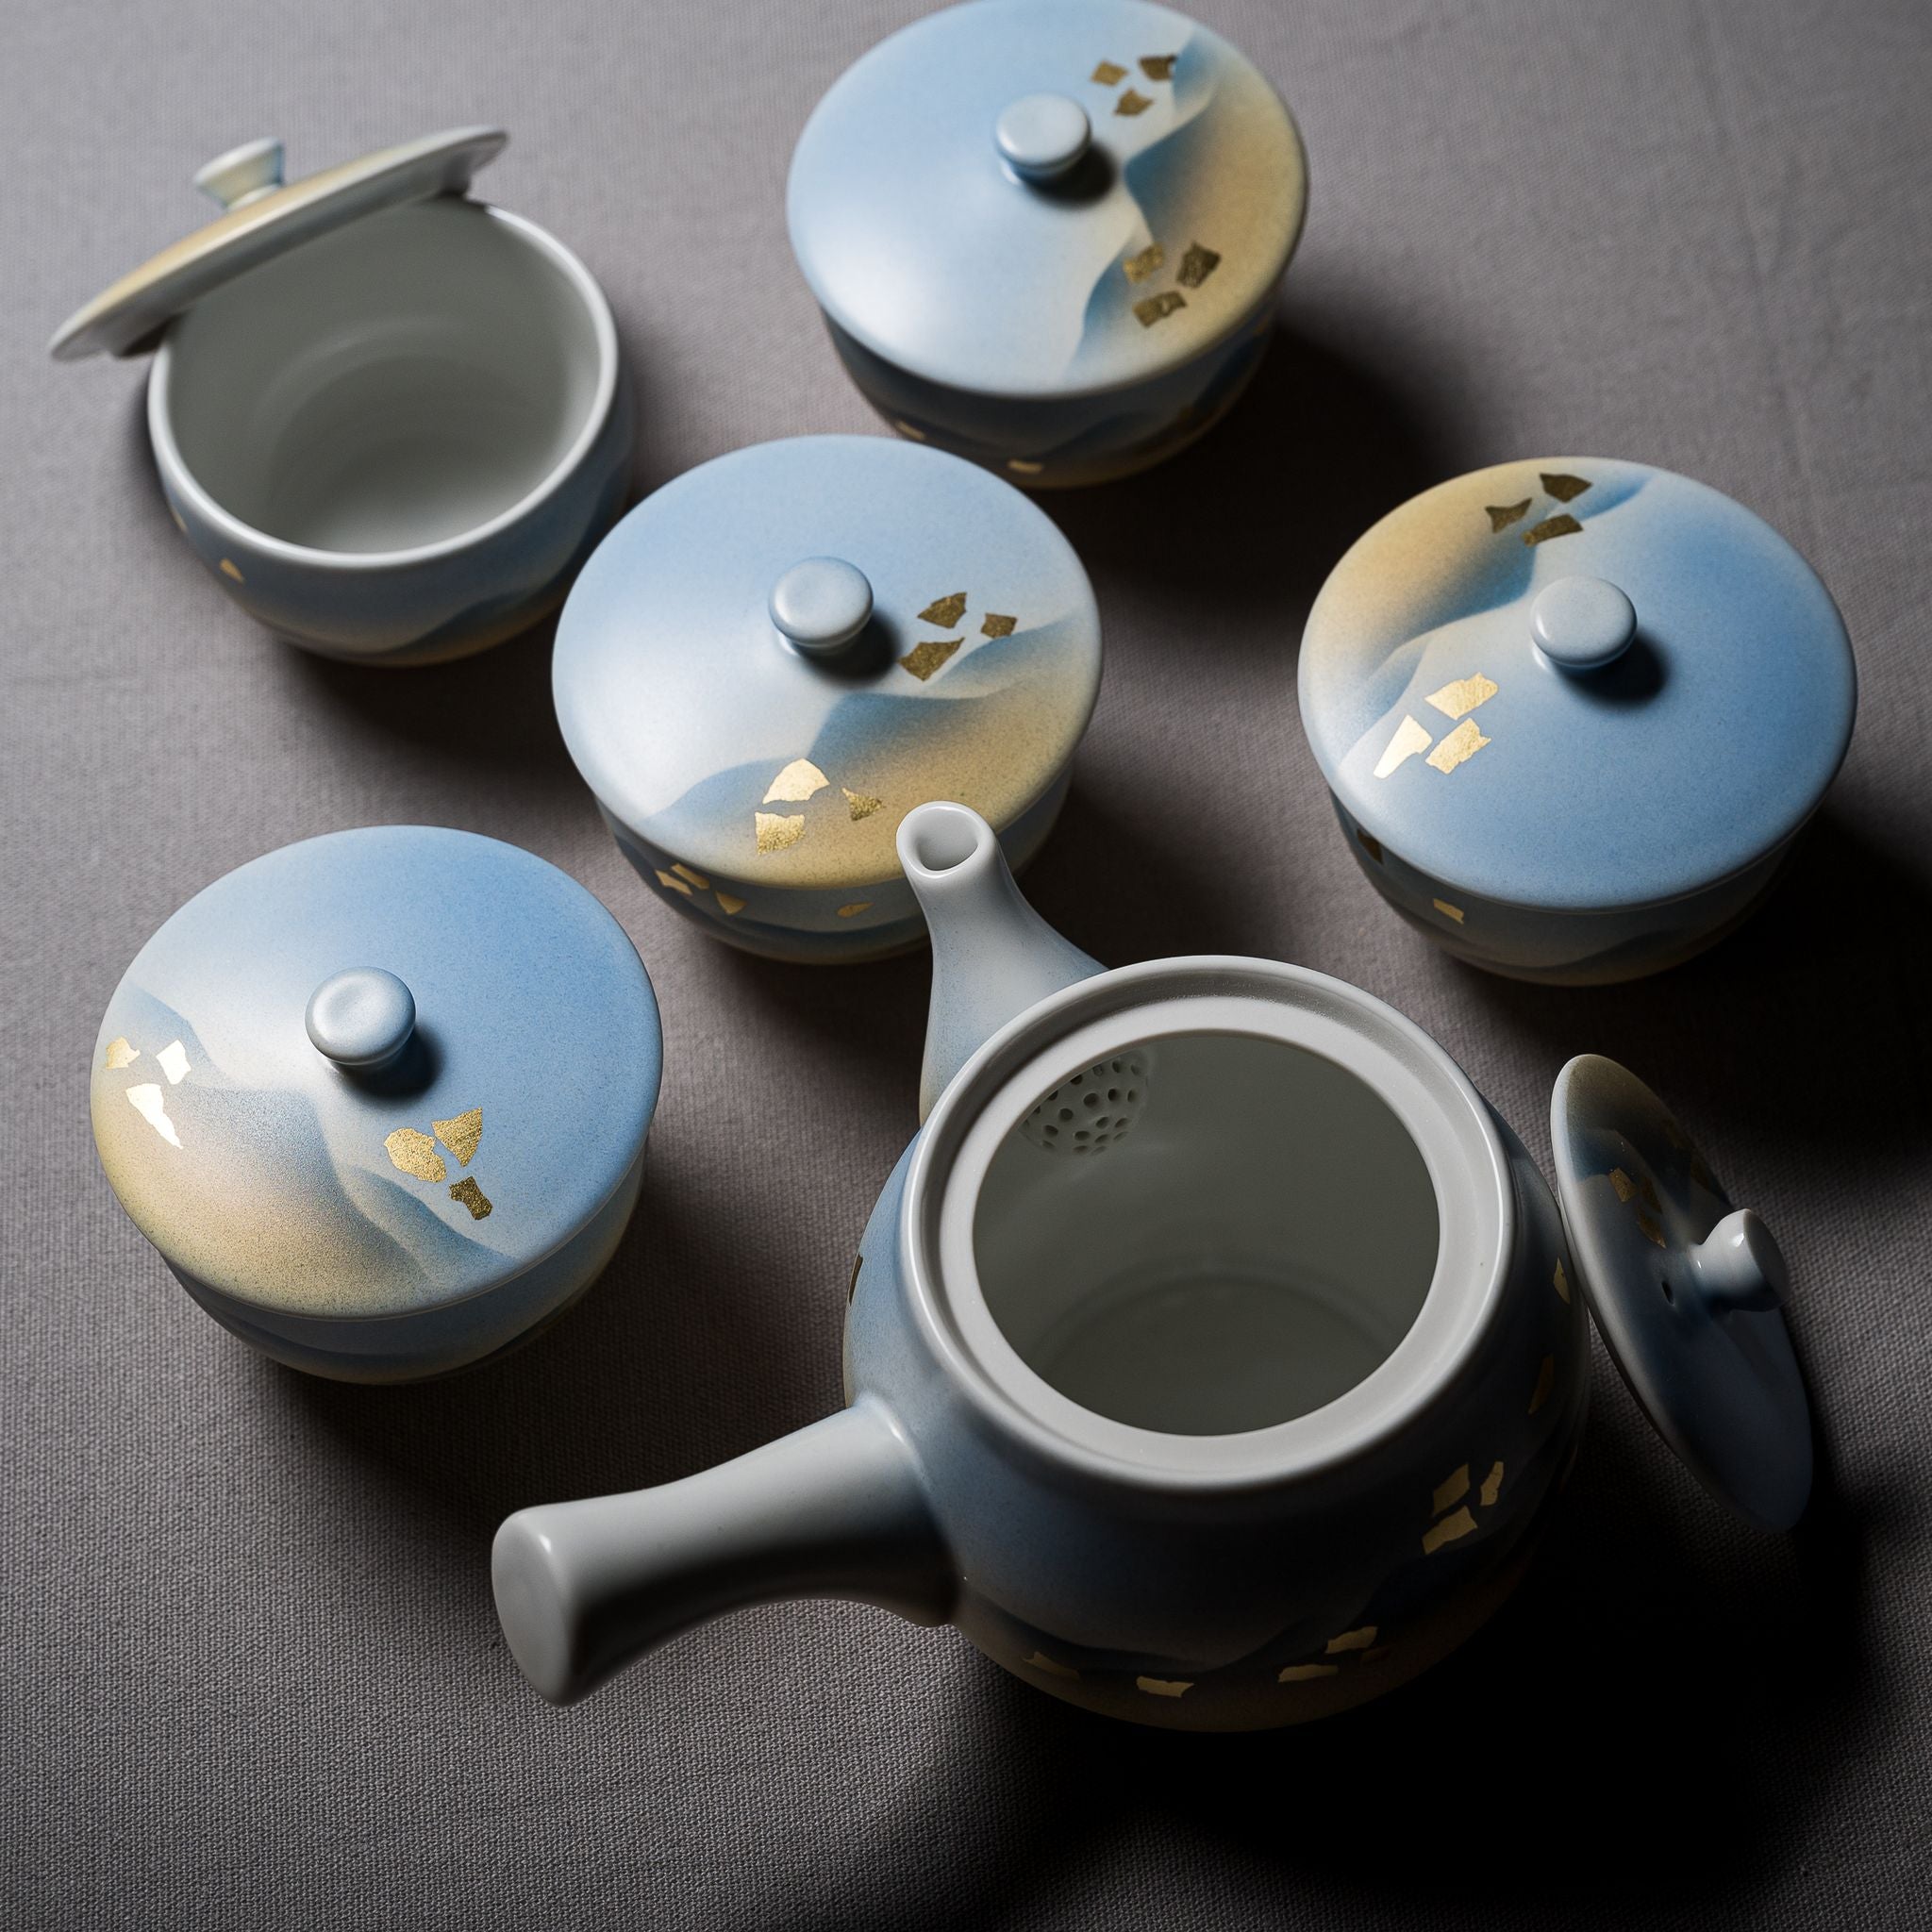 Kutani Ware Teapot and Cup with Lid Set of 5 / 九谷焼 蓋付き茶器セット